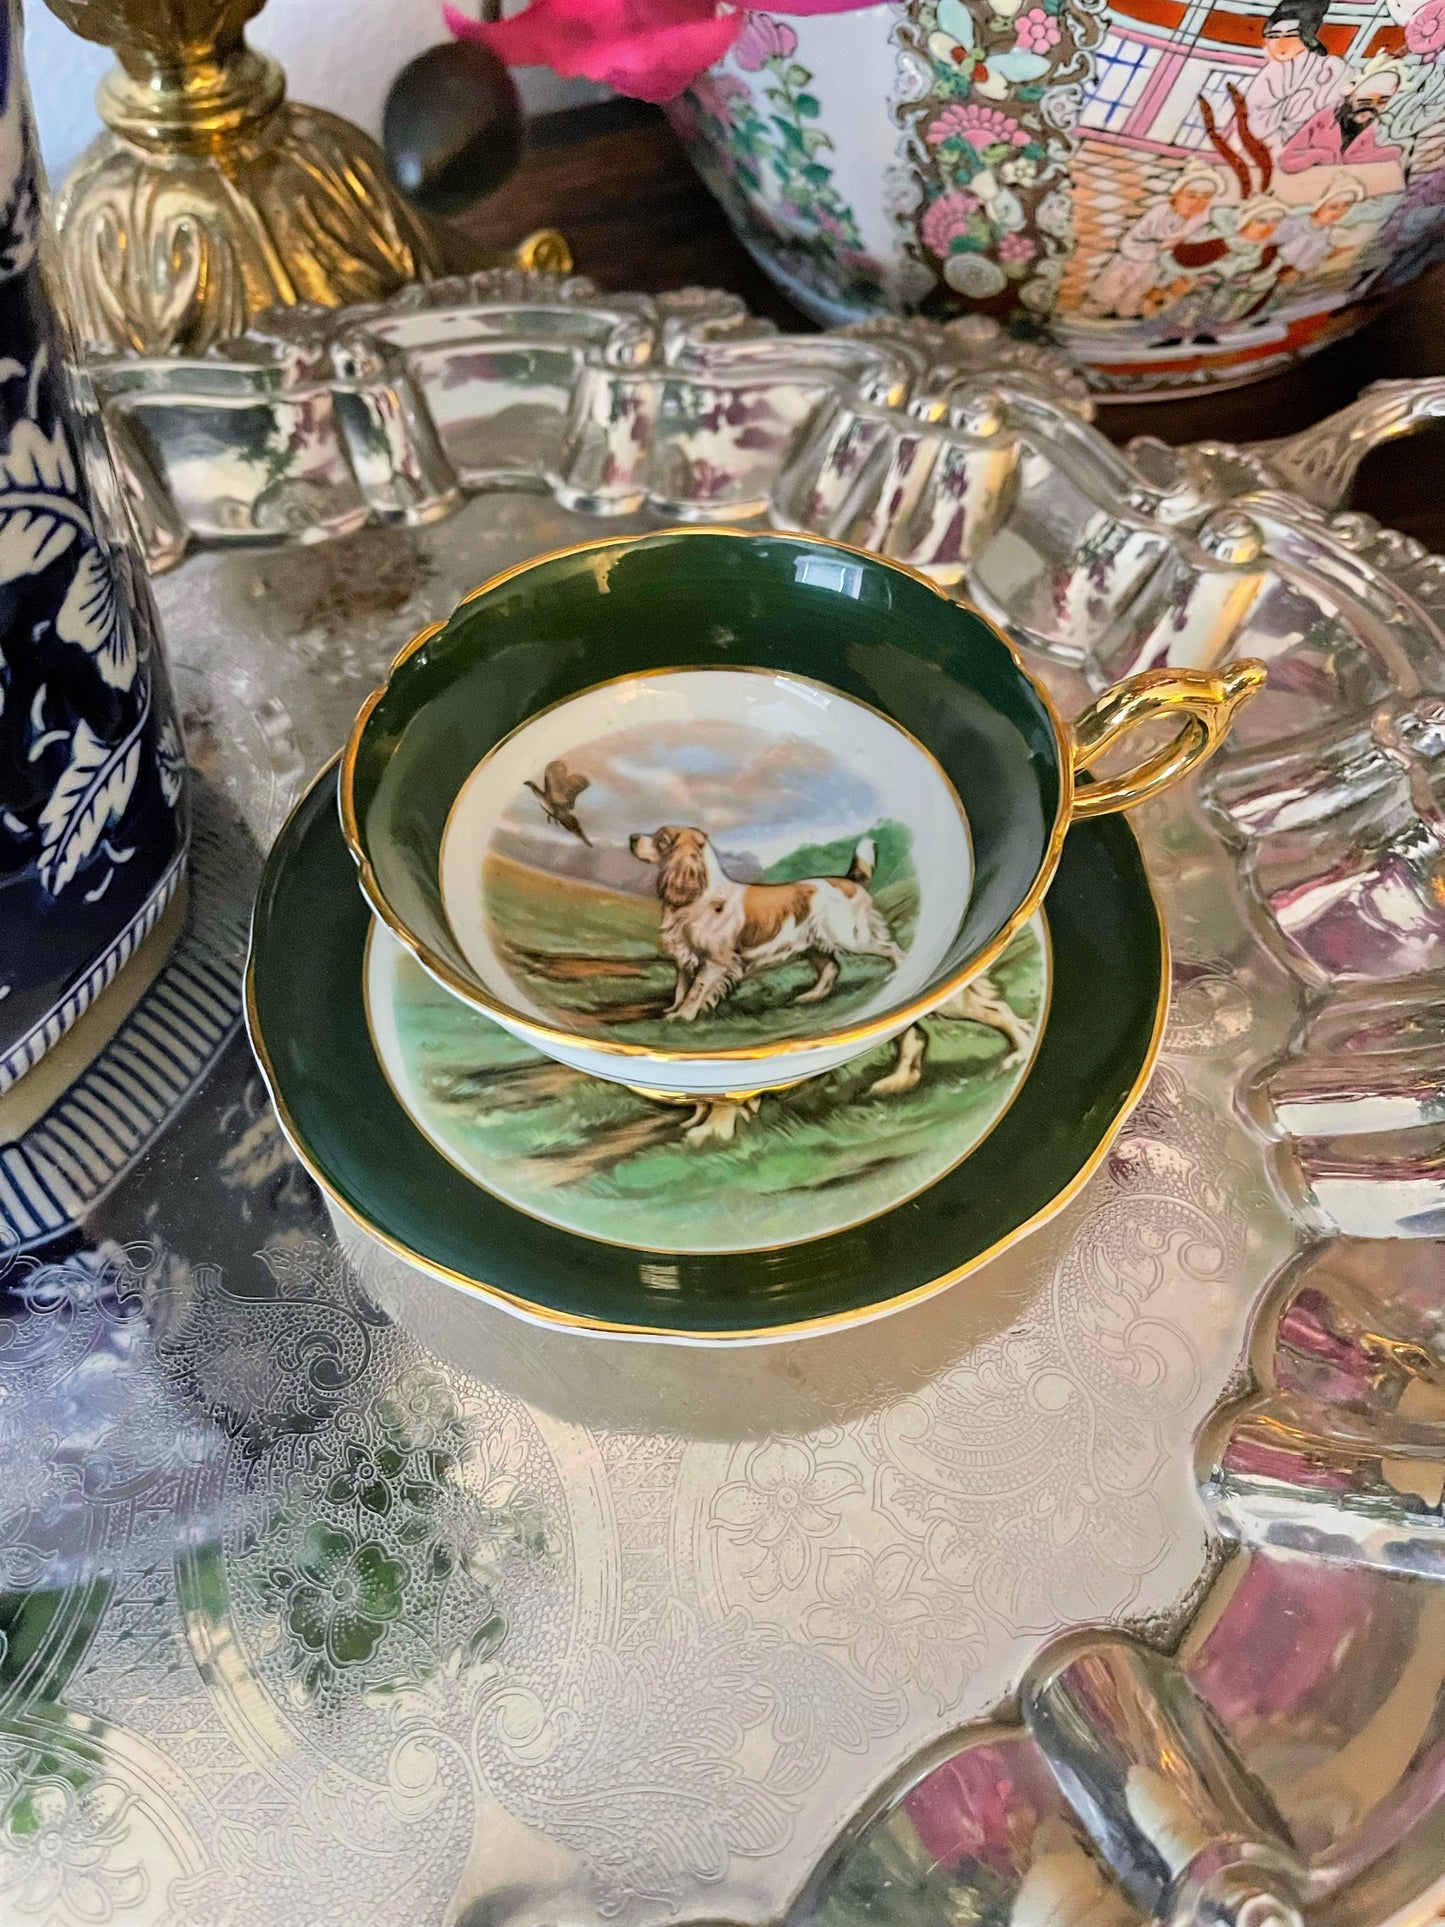 Spaniel Teacup and Saucer Set by Regency, Vintage, Made in England, Bone China